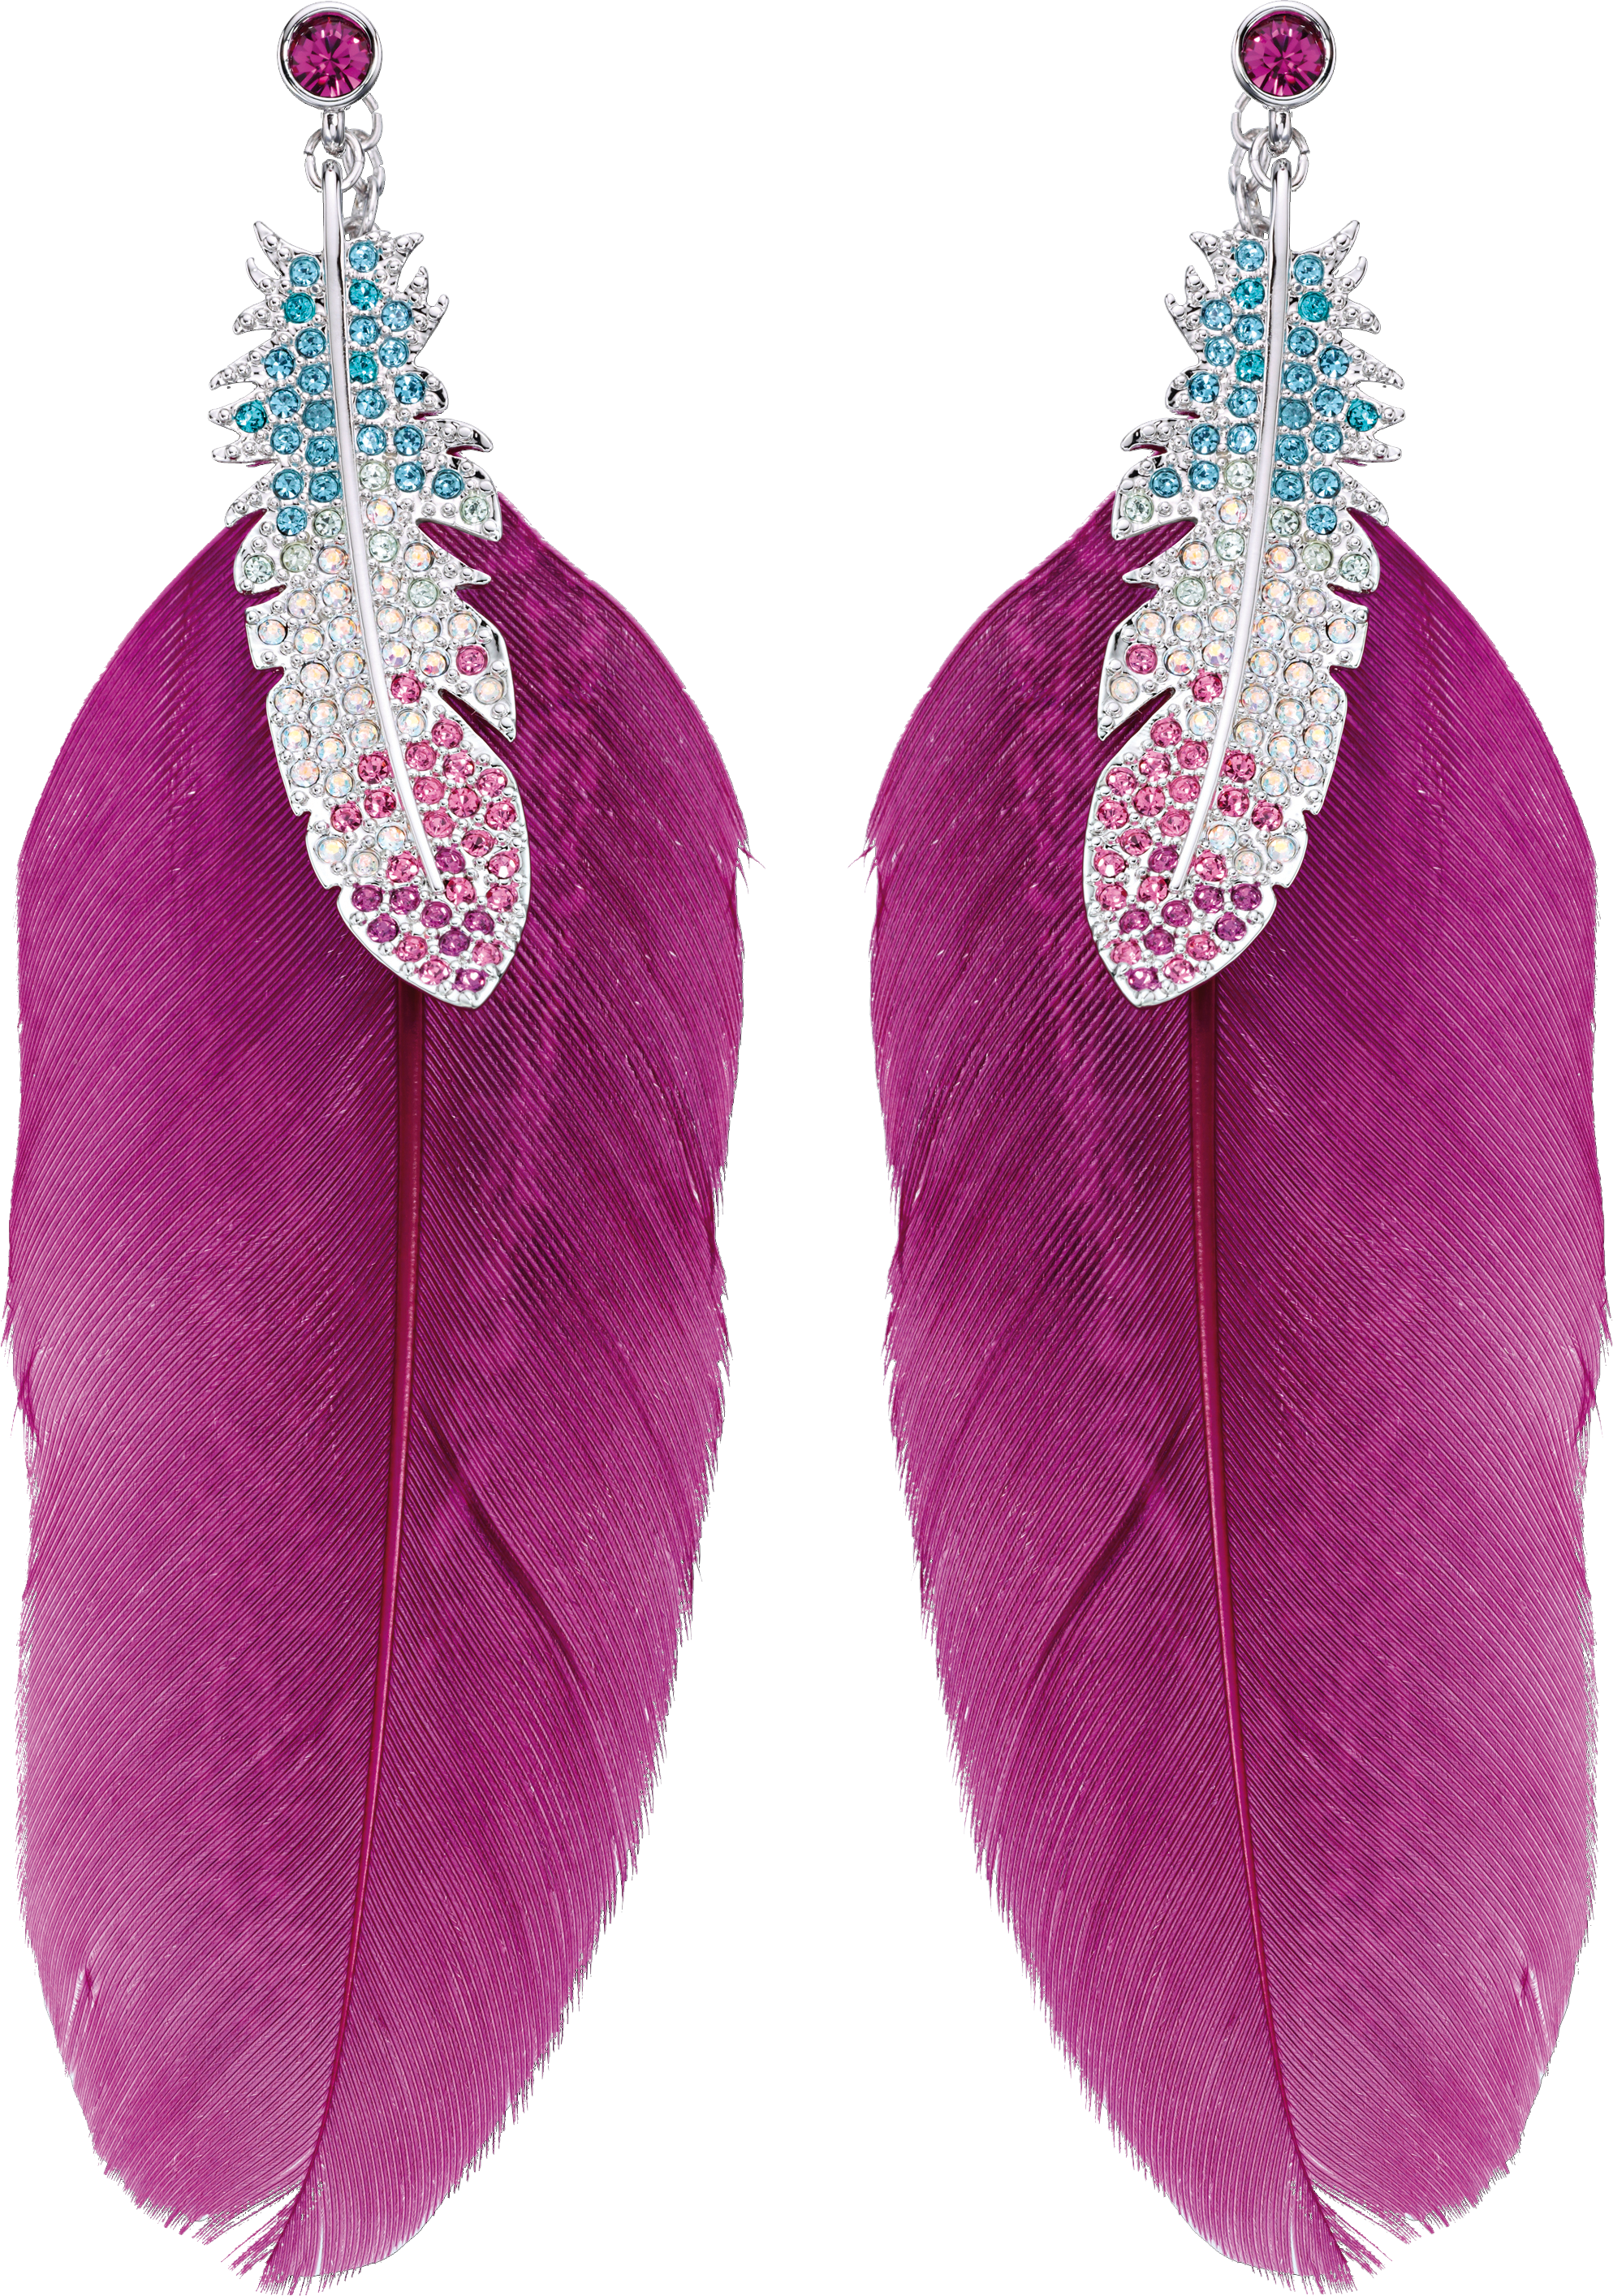 feather earrings PNG image